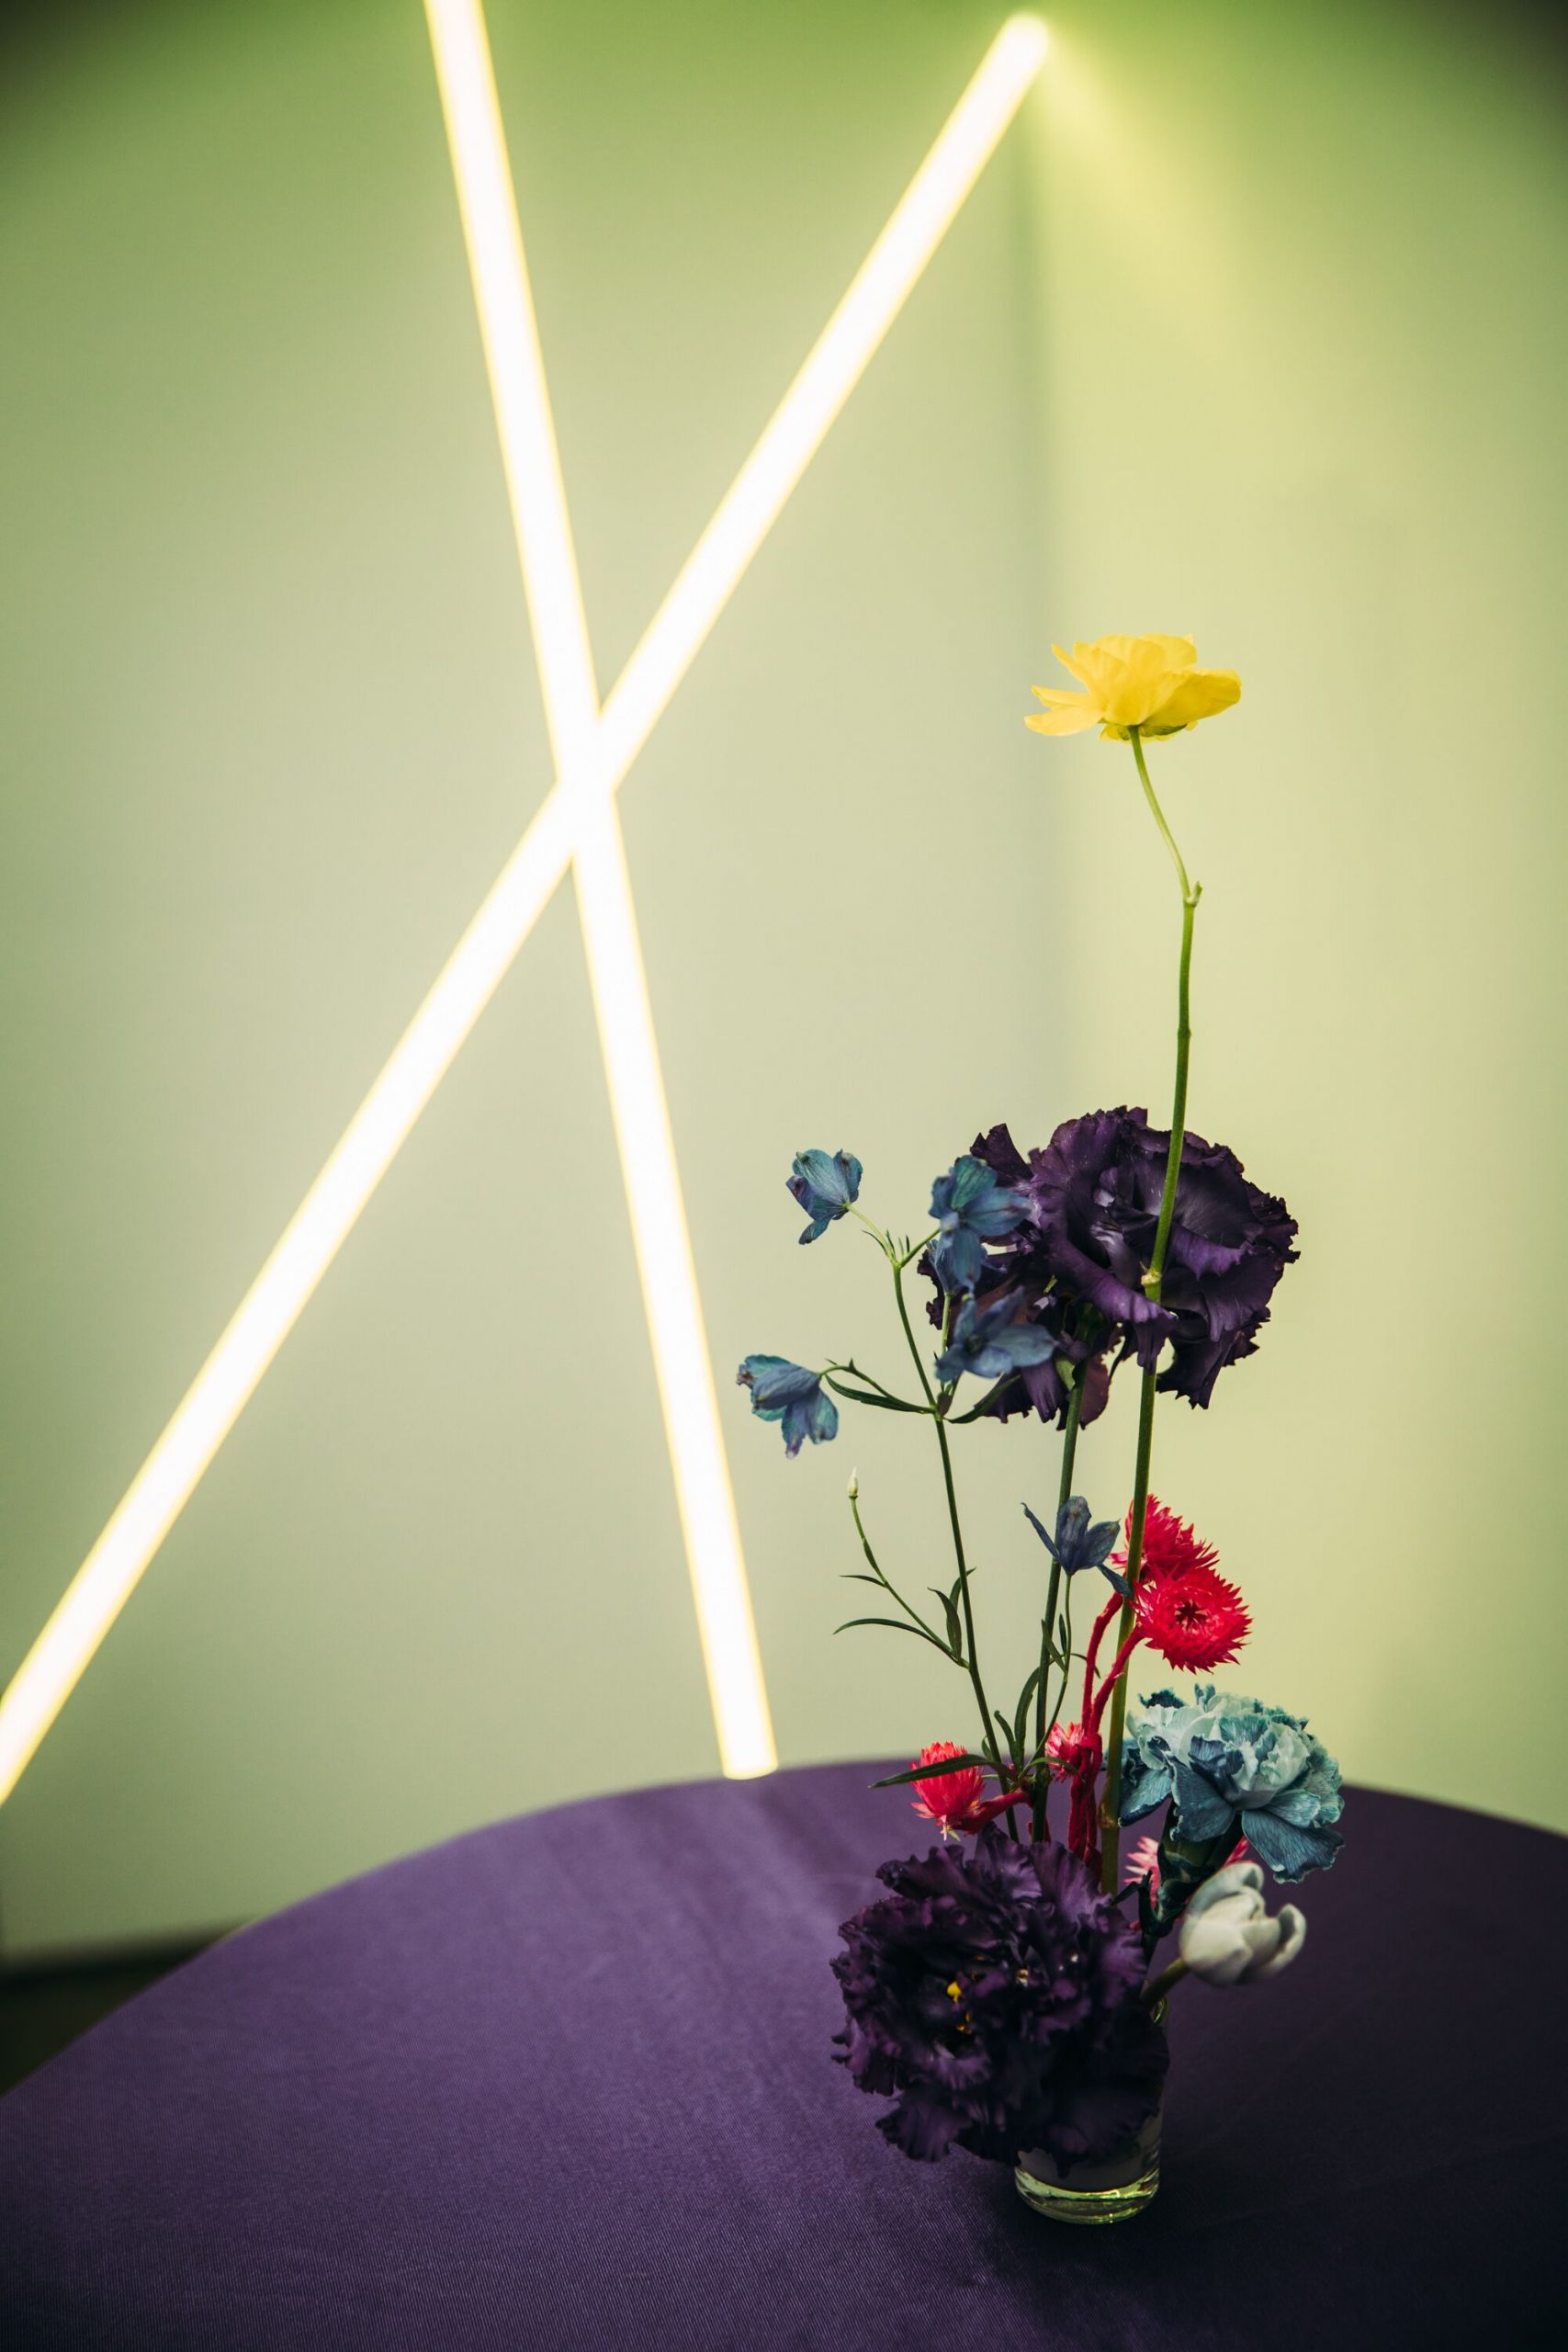 Modern, bold and minimalist florals at an Instagram event by Leslie Smith. 